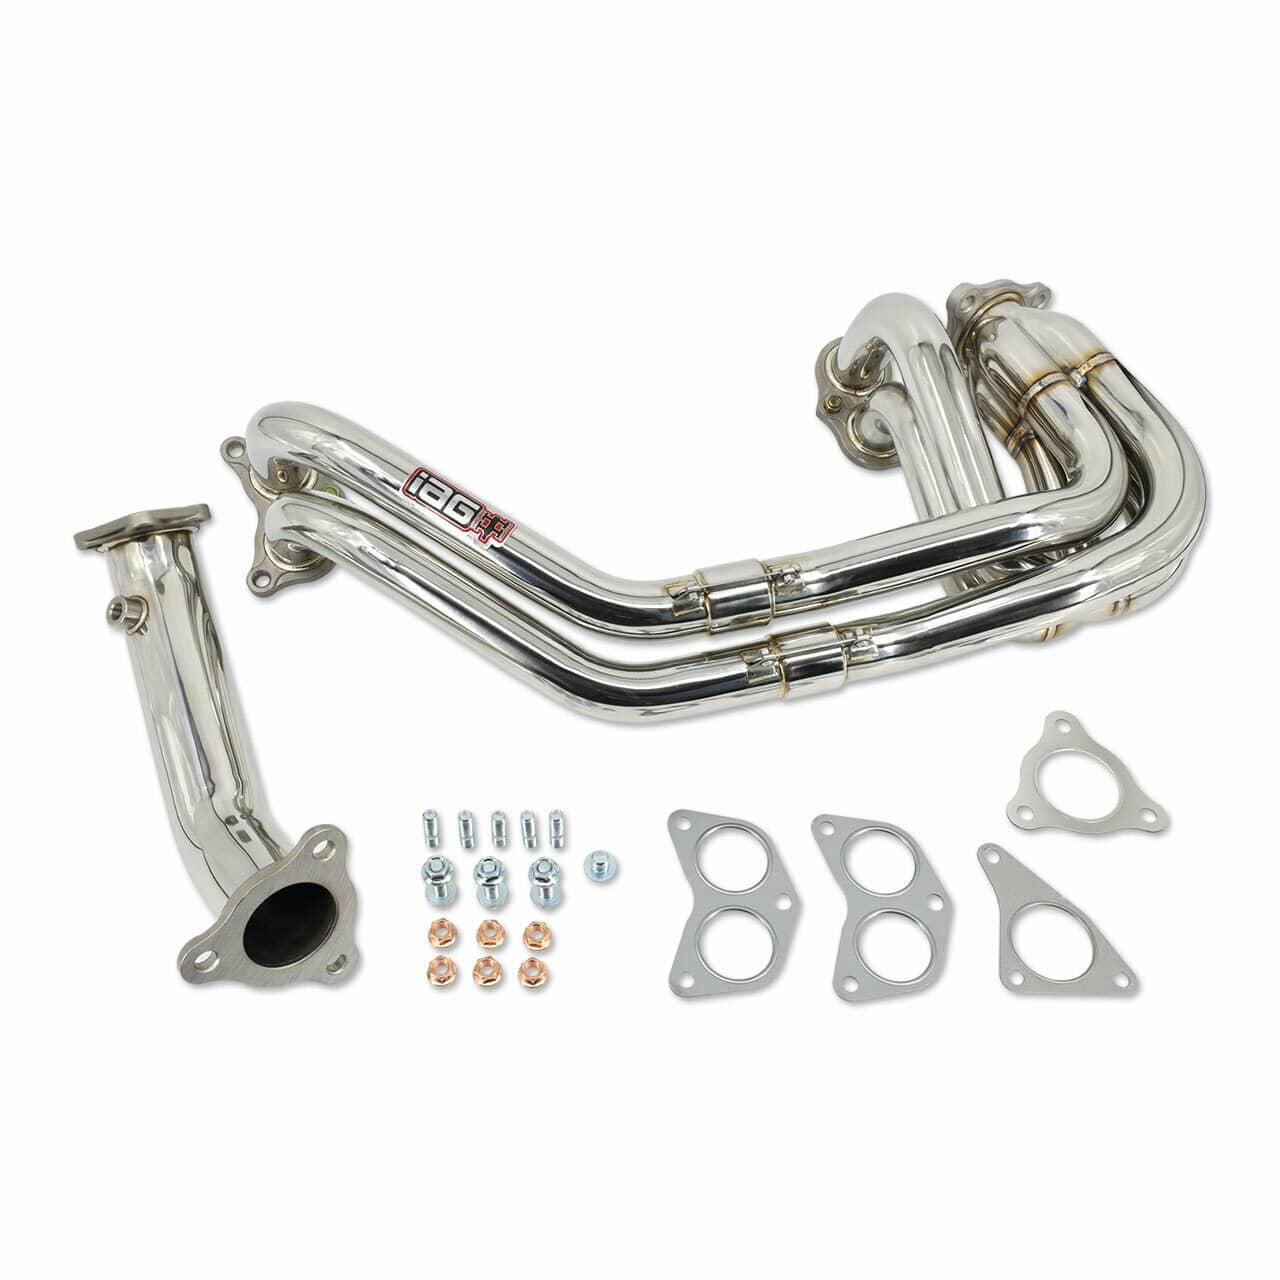 IAG Performance Unequal Length 3-Bolt Header & Uppipe for 02-14 WRX, 04-20 STI, 05-09 LGT, 04-08 FXT - Dirty Racing Products